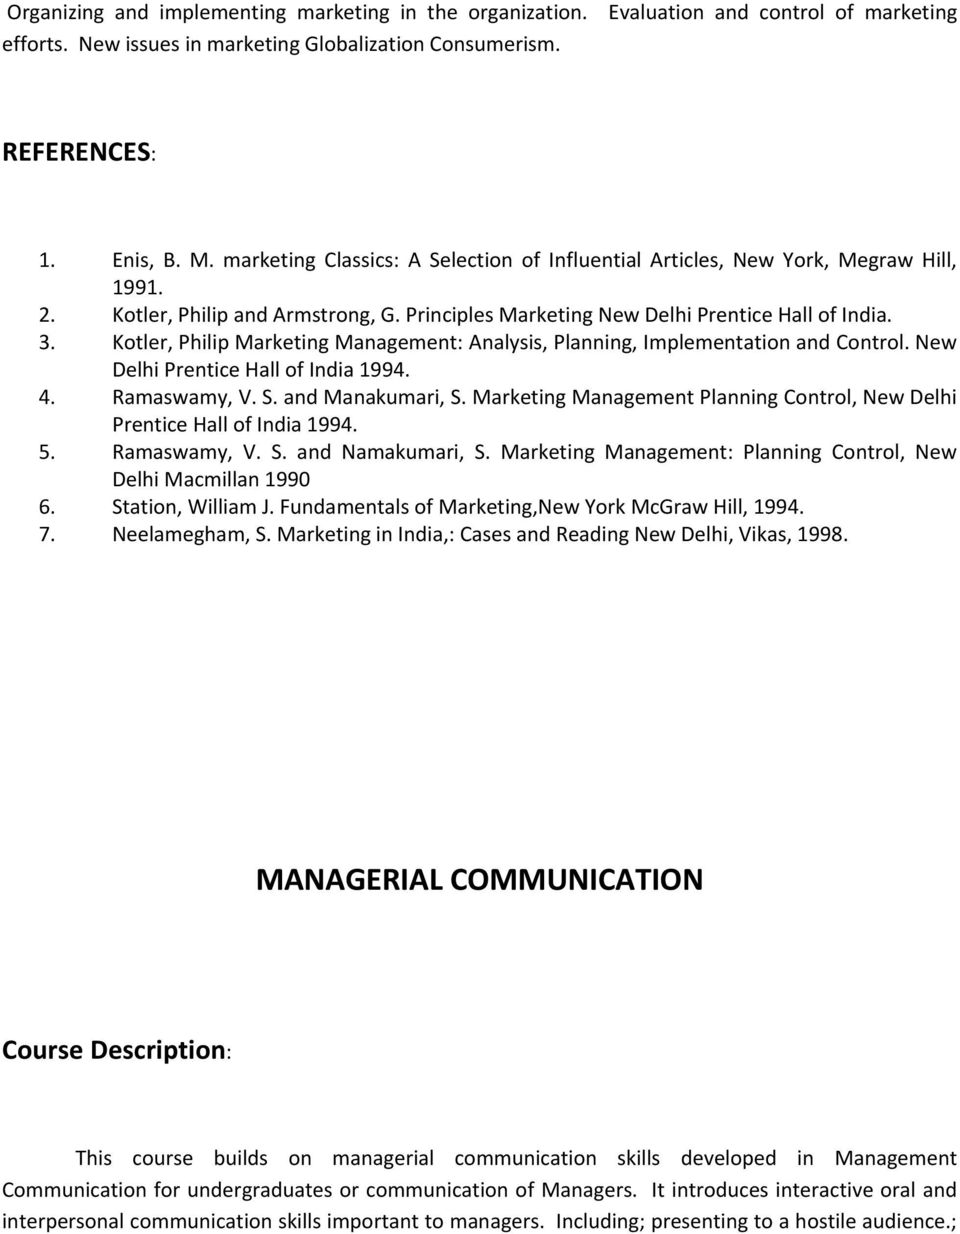 Kotler, Philip Marketing Management: Analysis, Planning, Implementation and Control. New Delhi Prentice Hall of India 1994. 4. Ramaswamy, V. S. and Manakumari, S.